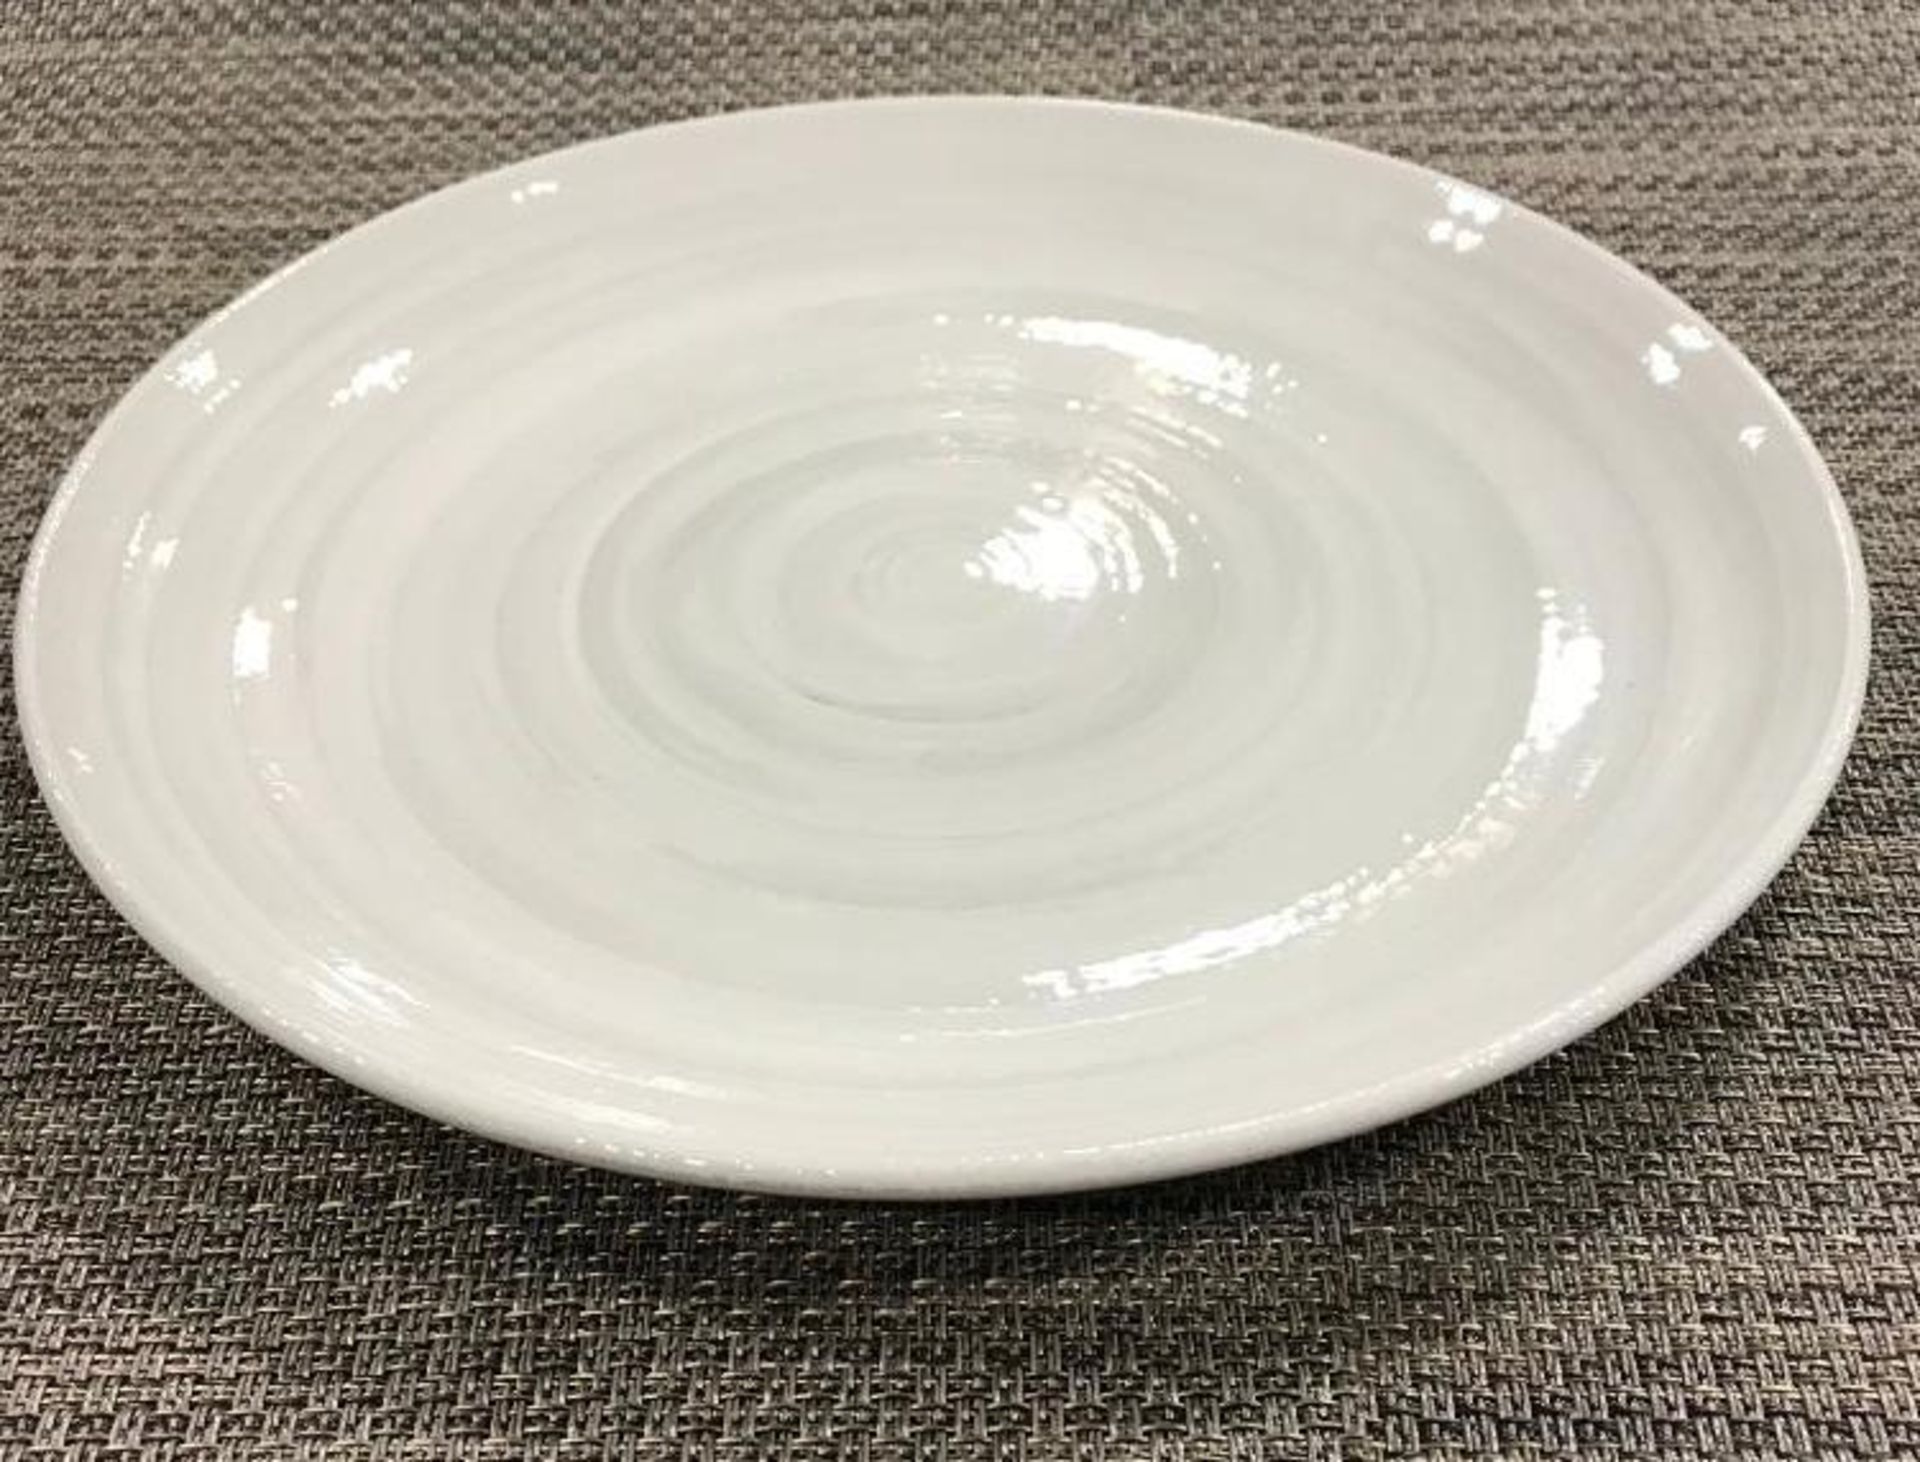 DUDSON RIPPLE GREY PLATE 10.5" - 12/CASE, MADE IN ENGLAND - Image 2 of 5